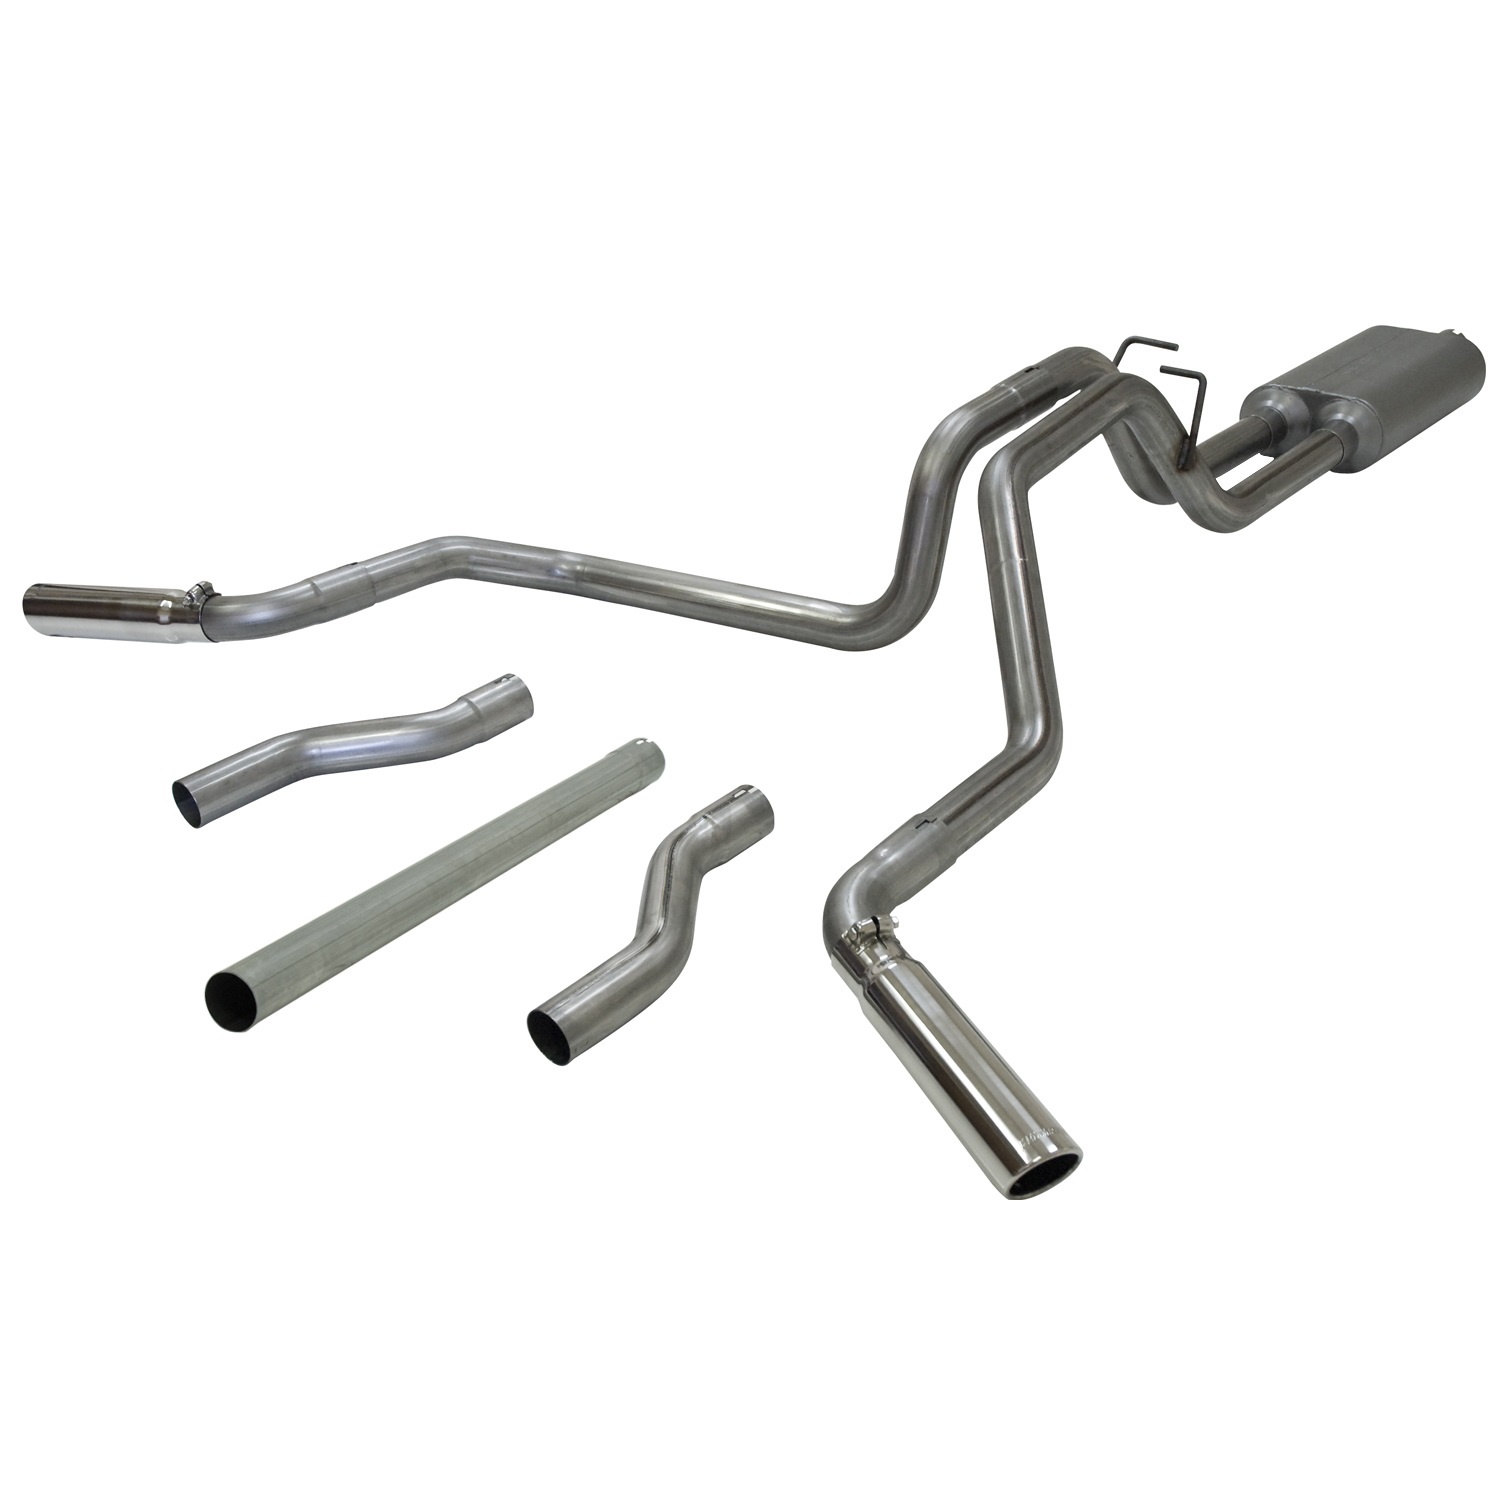 Flowmaster Flowmaster 817429 American Thunder Cat Back Exhaust System Fits 94-01 Ram 1500